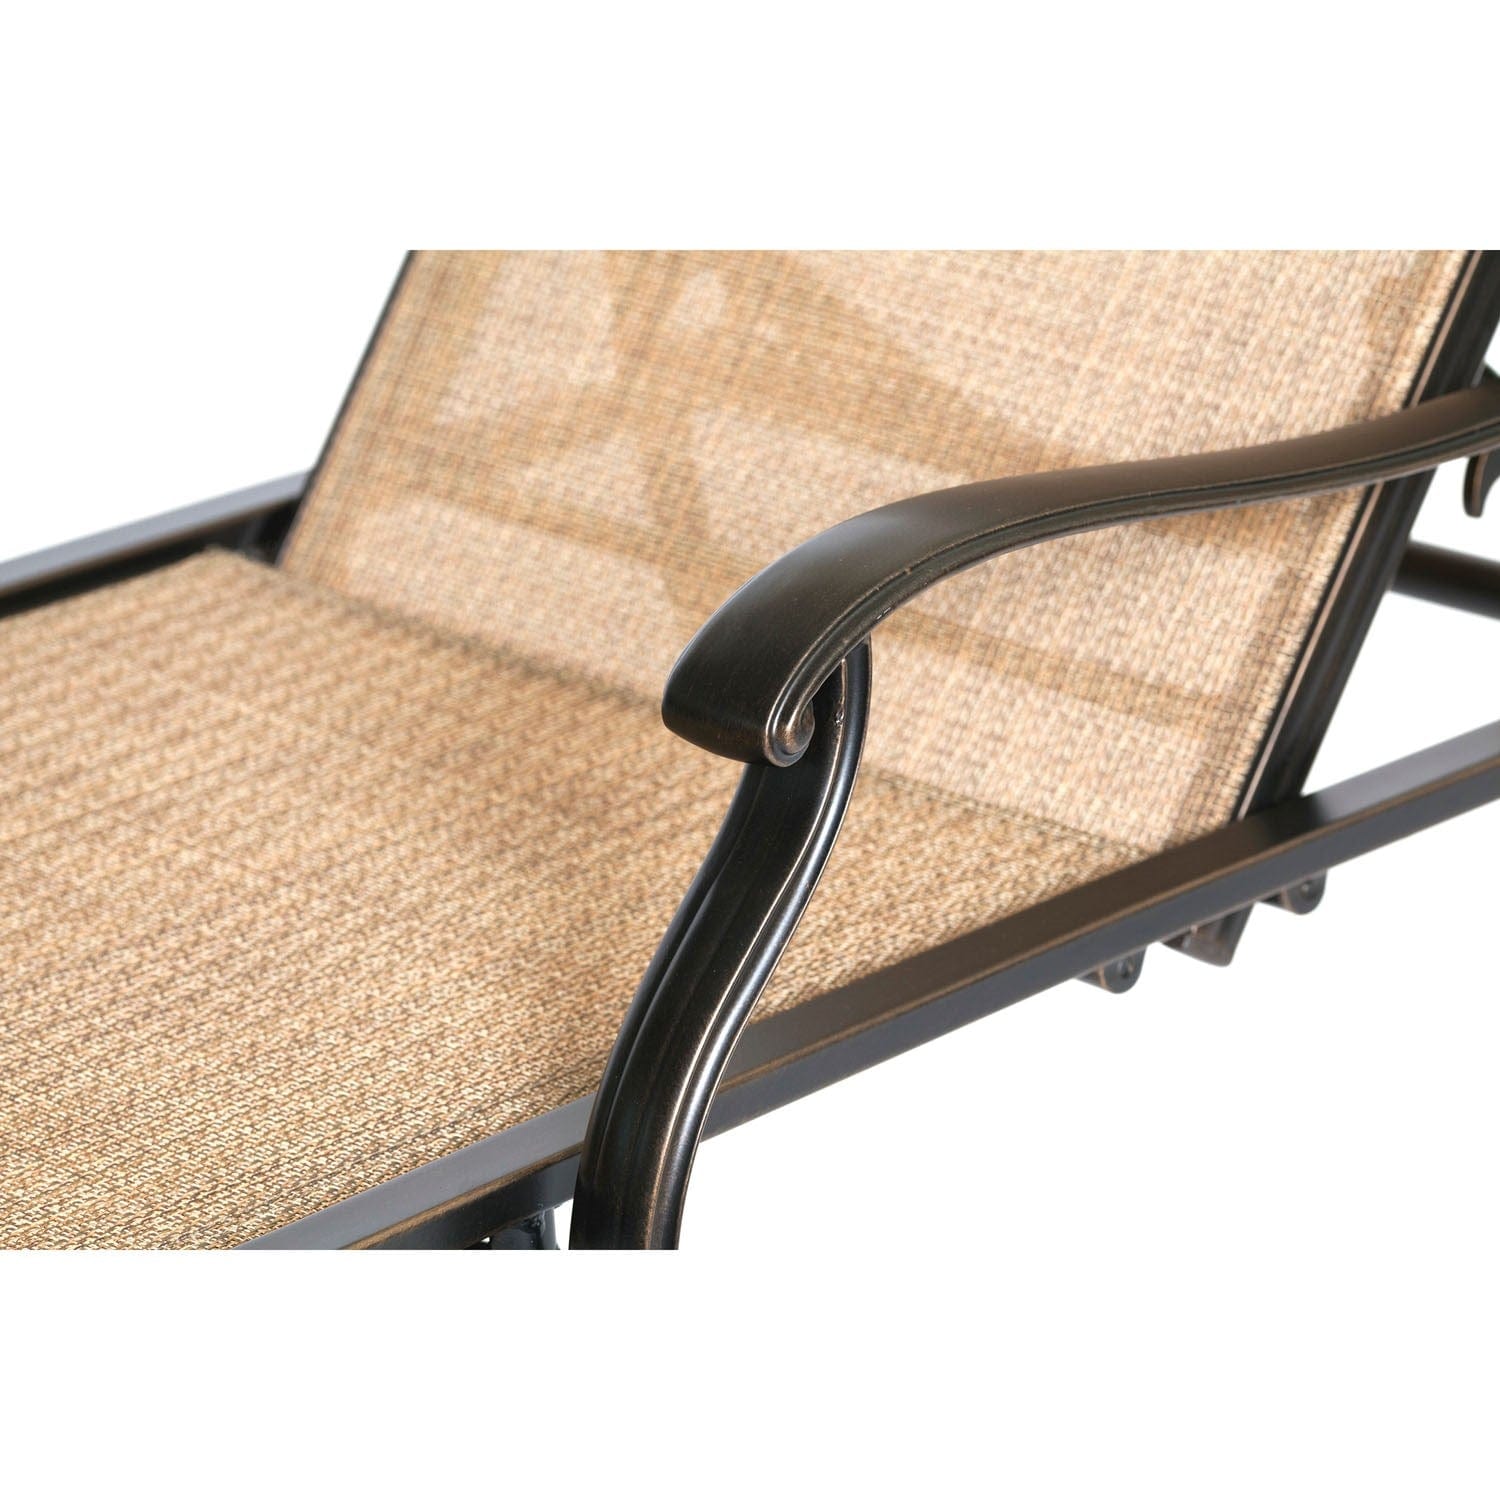 Hanover Chaise Lounge Hanover Monaco Chaise Lounge Chairs - Set of Two - MONCHS2PC